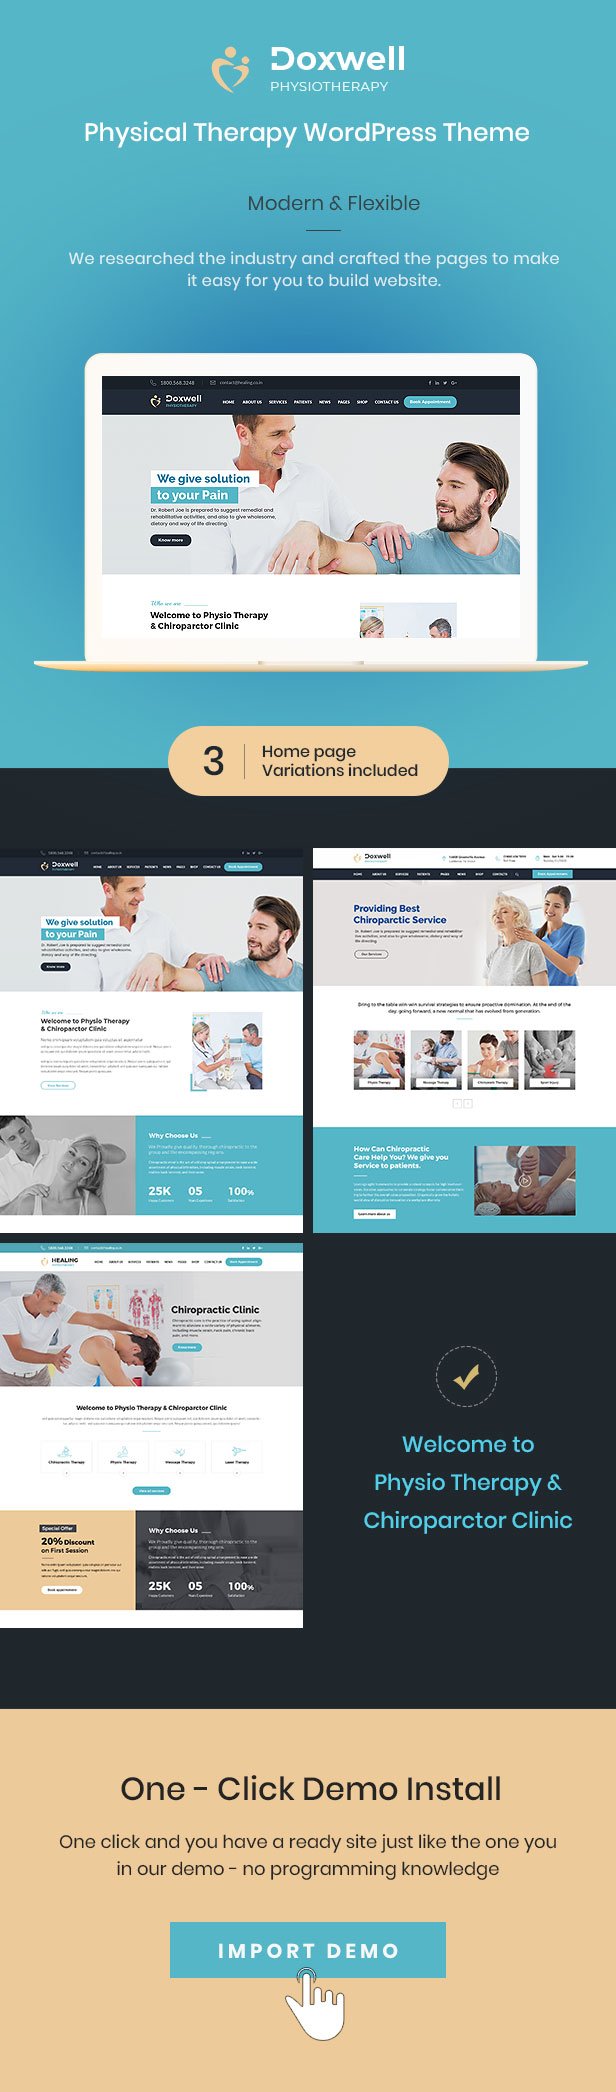 Doxwell : Physical Therapy WordPress Theme - 1